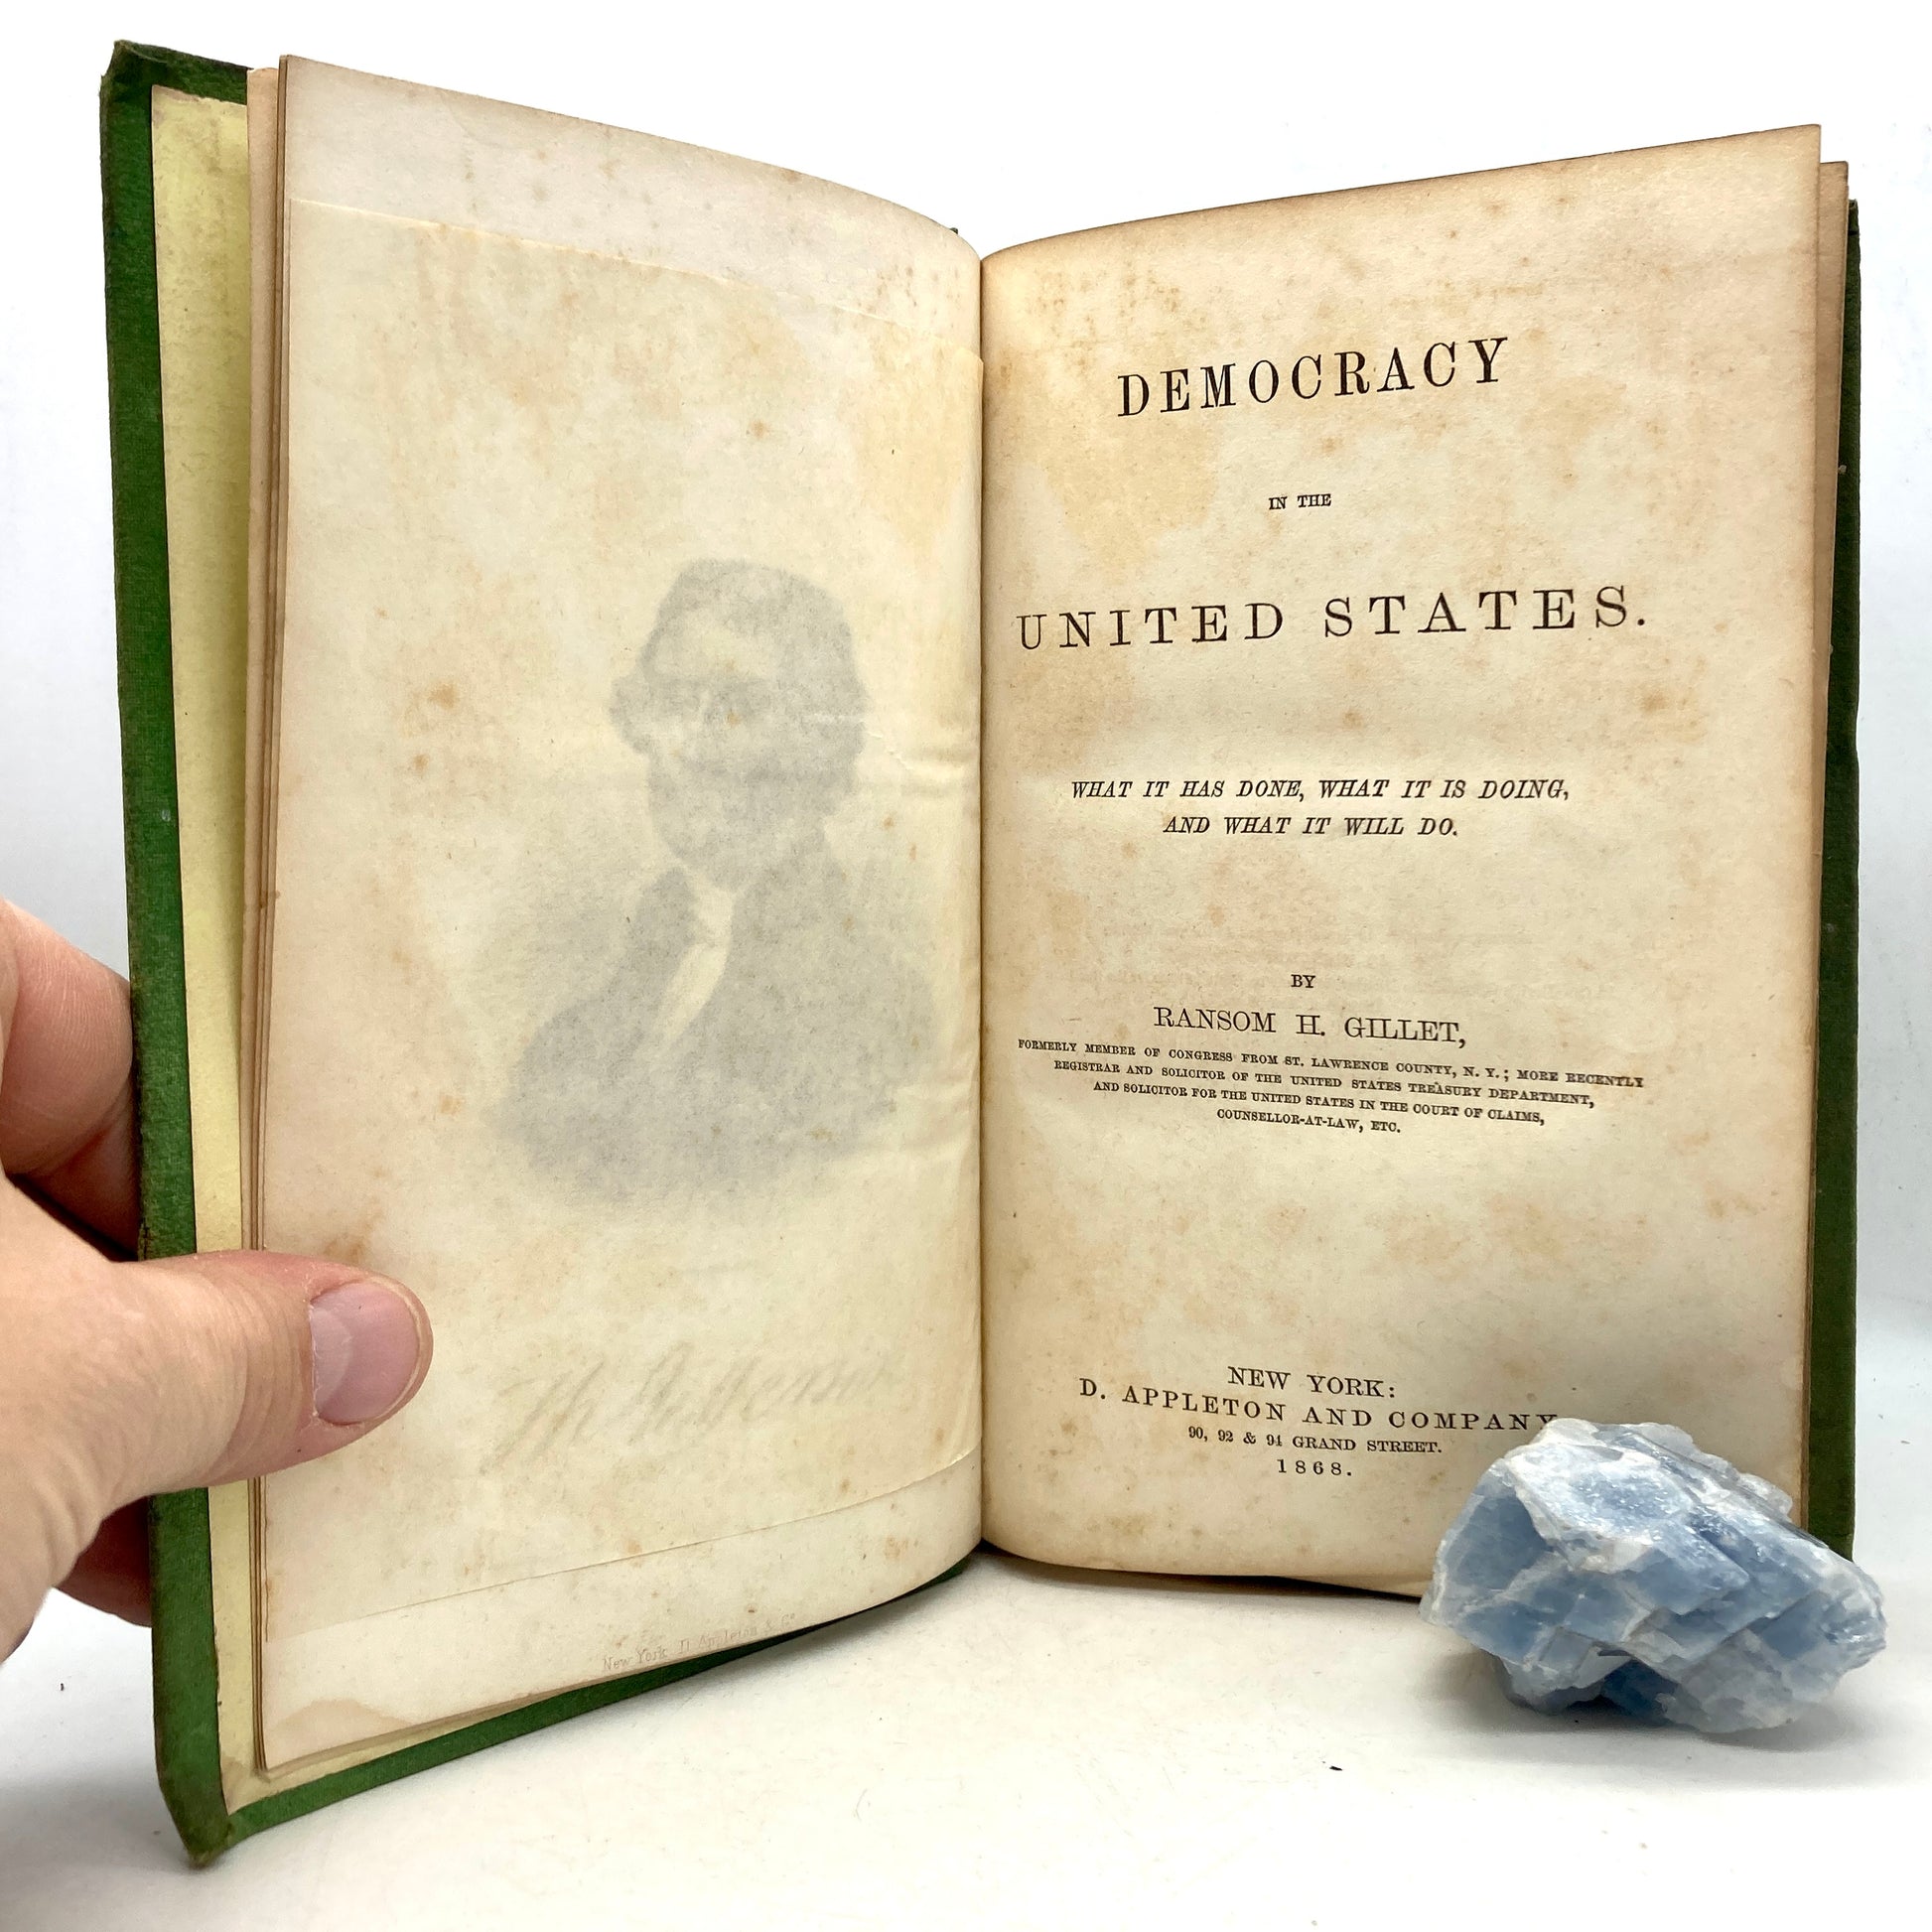 GILLET, Ransom H. "Democracy in the United States" [D. Appleton & co, 1868] - Buzz Bookstore